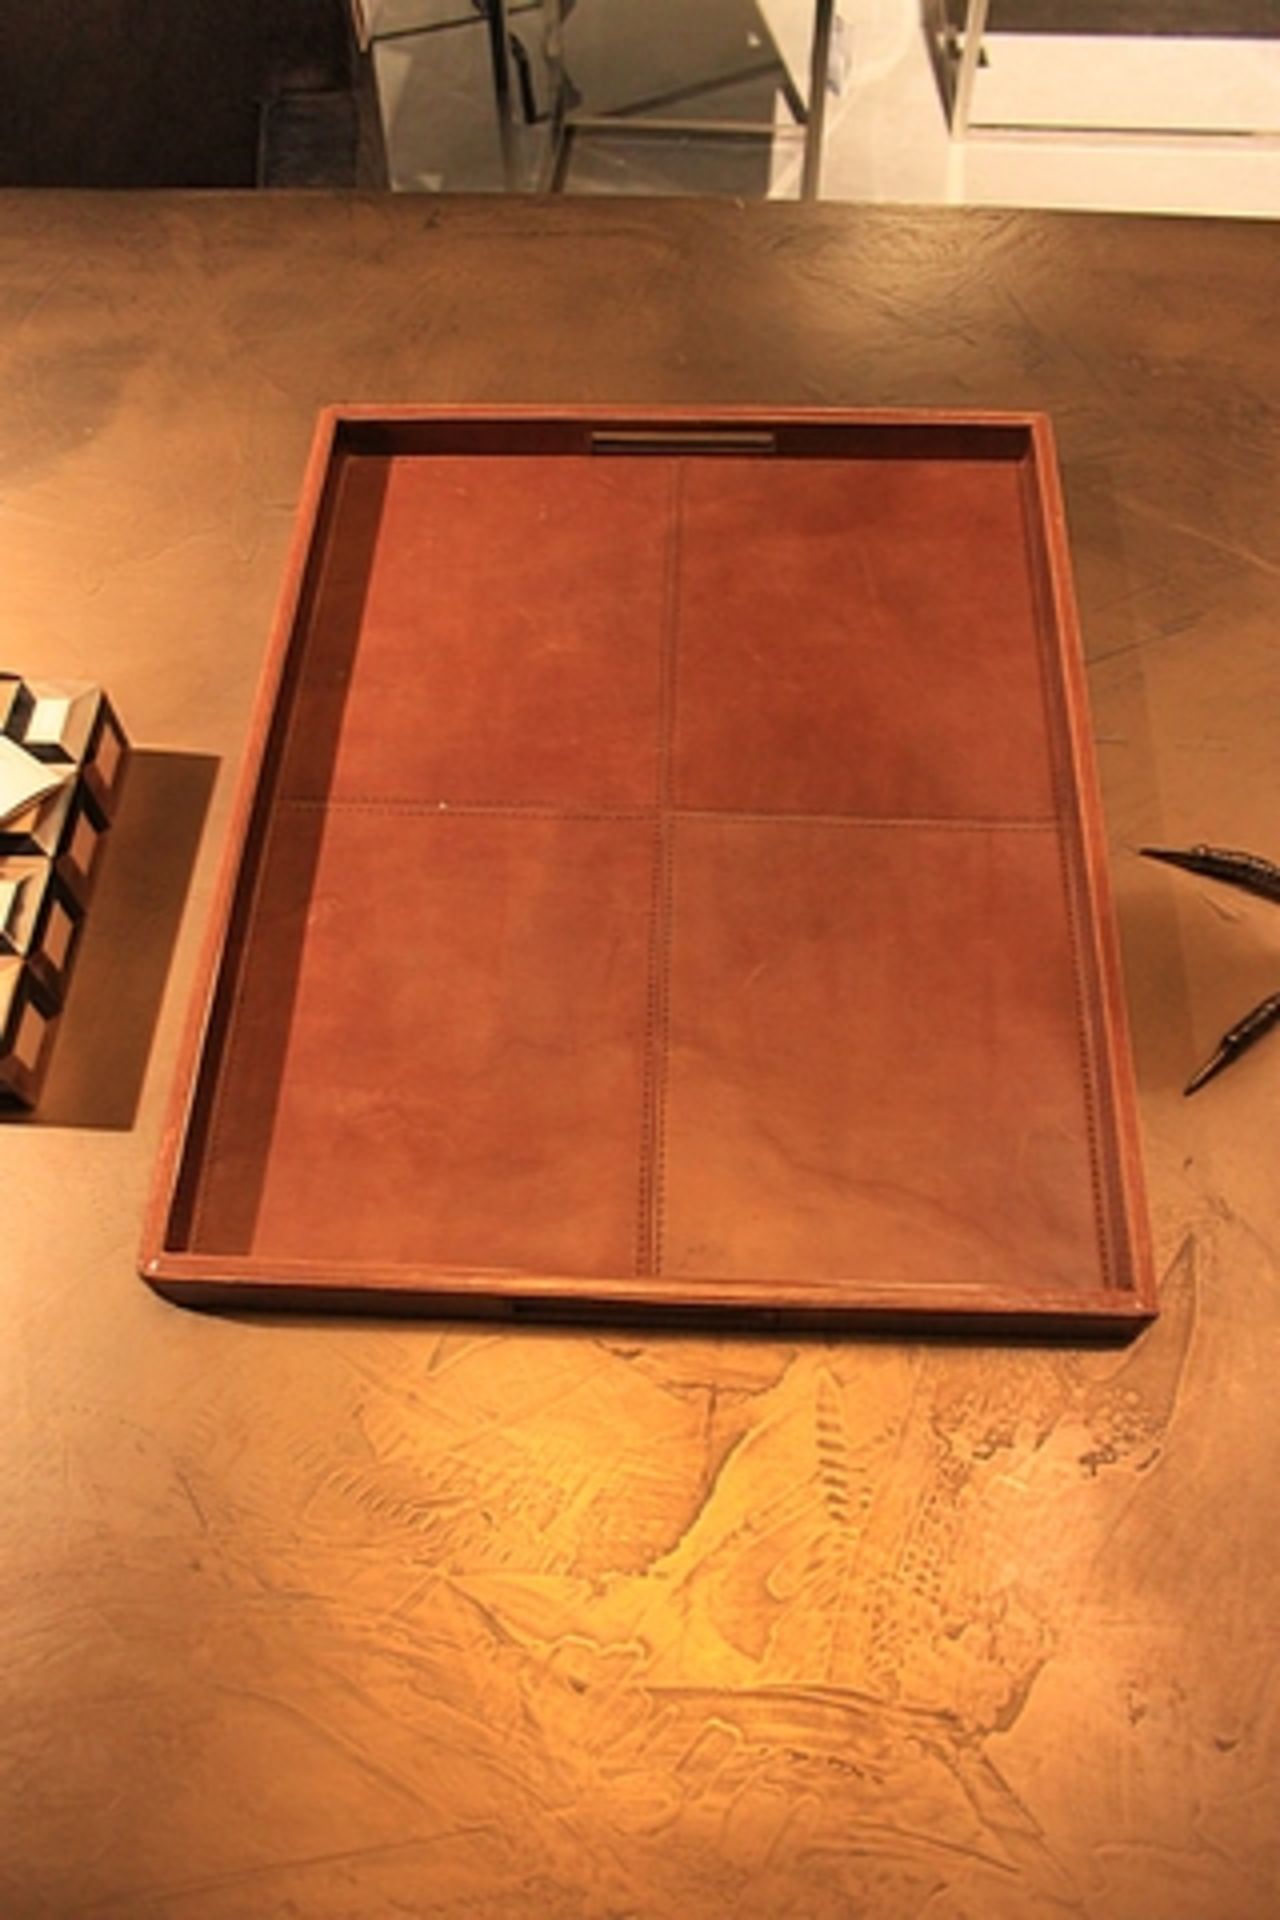 Tray Teller the tray structured into a simple design and upholstered in antique tan leather